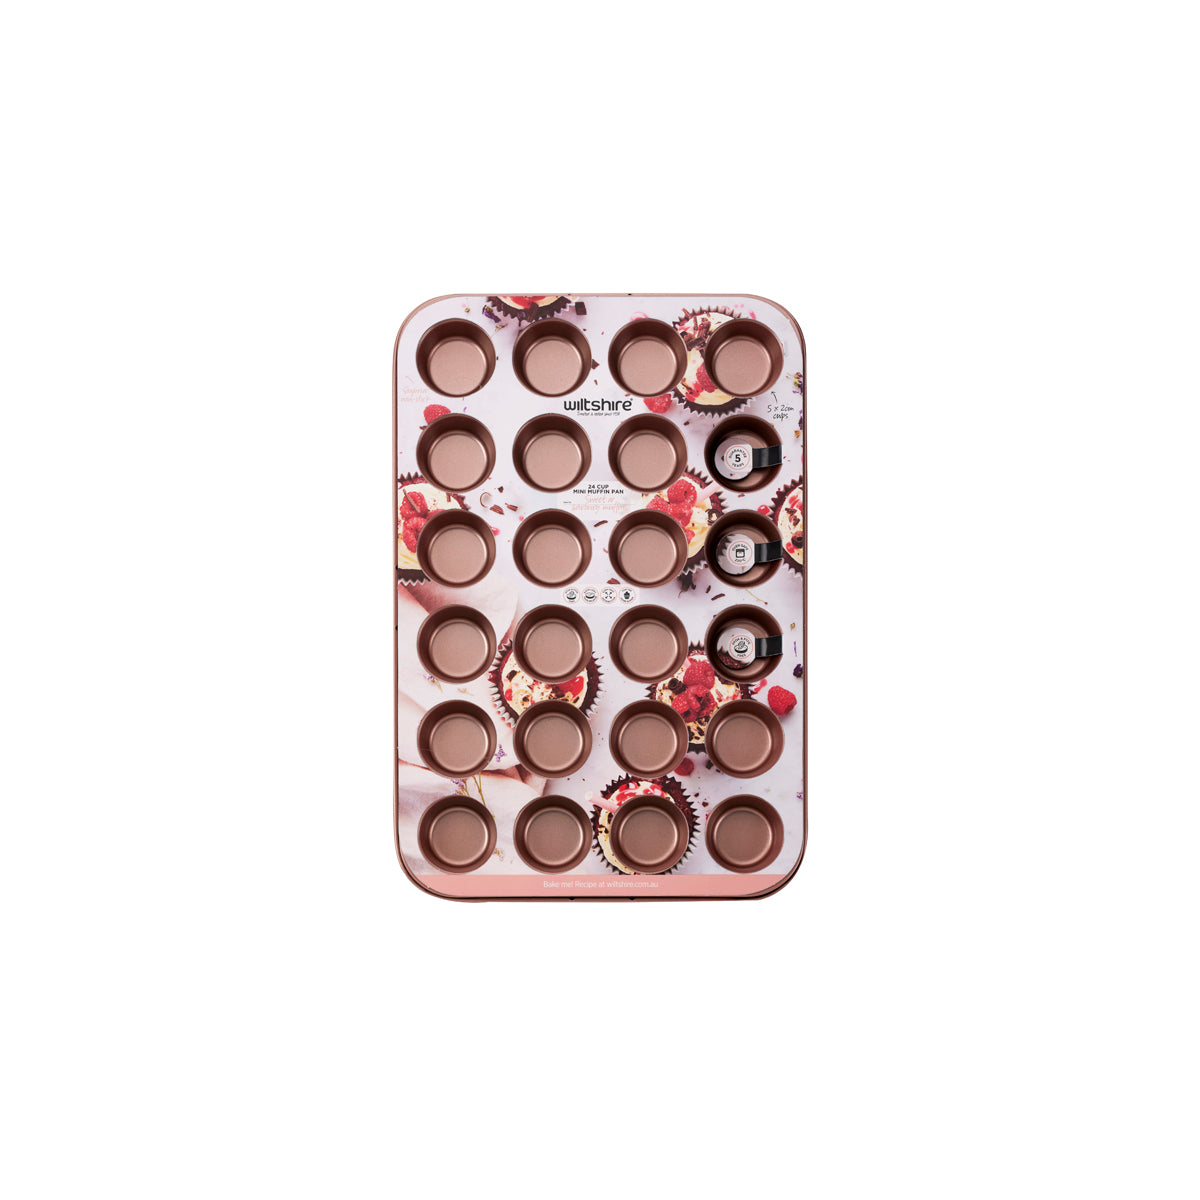 WLT40757 Wiltshire Rose Gold 24 Cup Muffin Pan  Tomkin Australia Hospitality Supplies